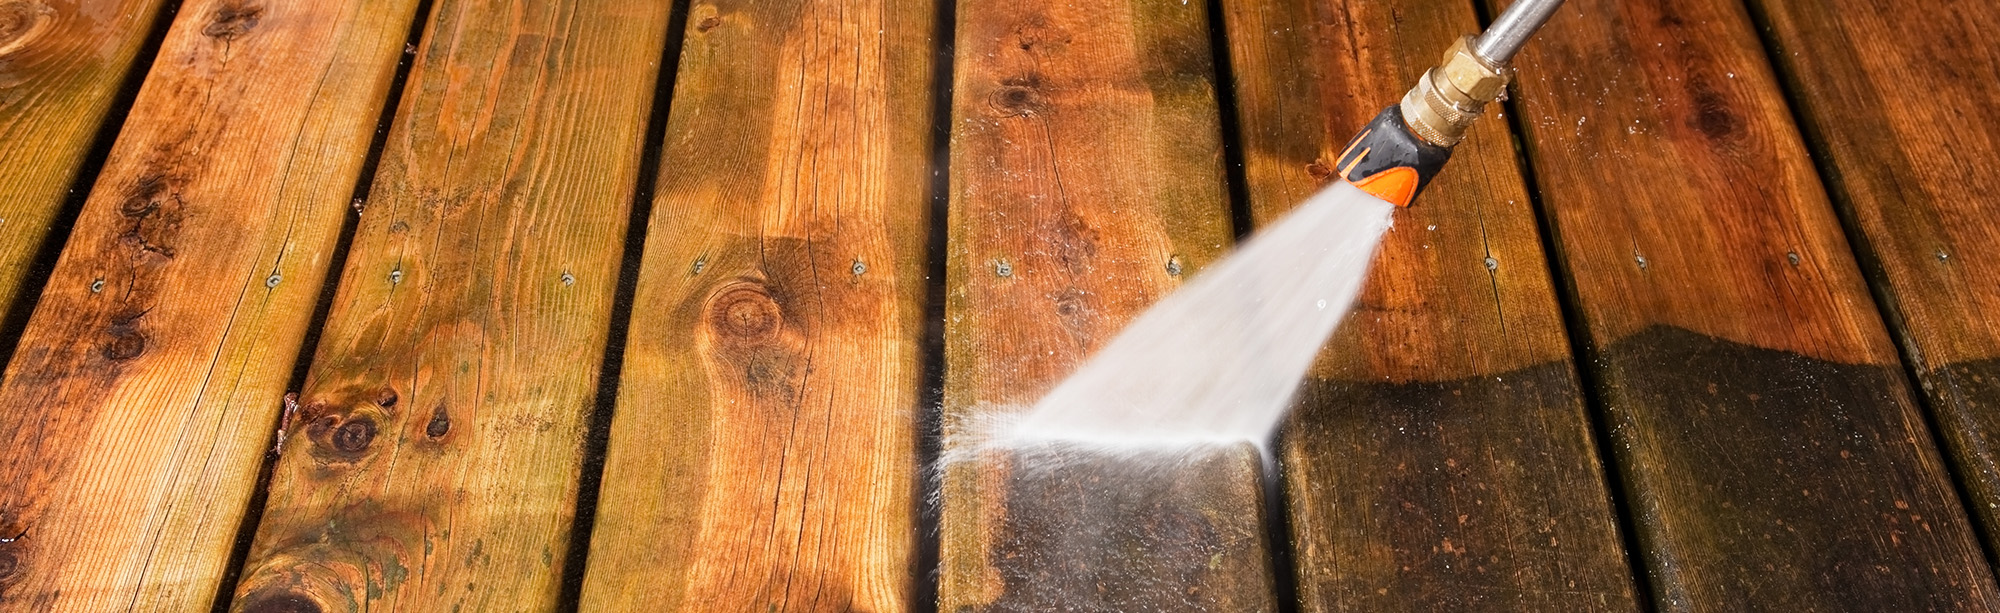 Pressure Washing Services in Southeast Wisconsin